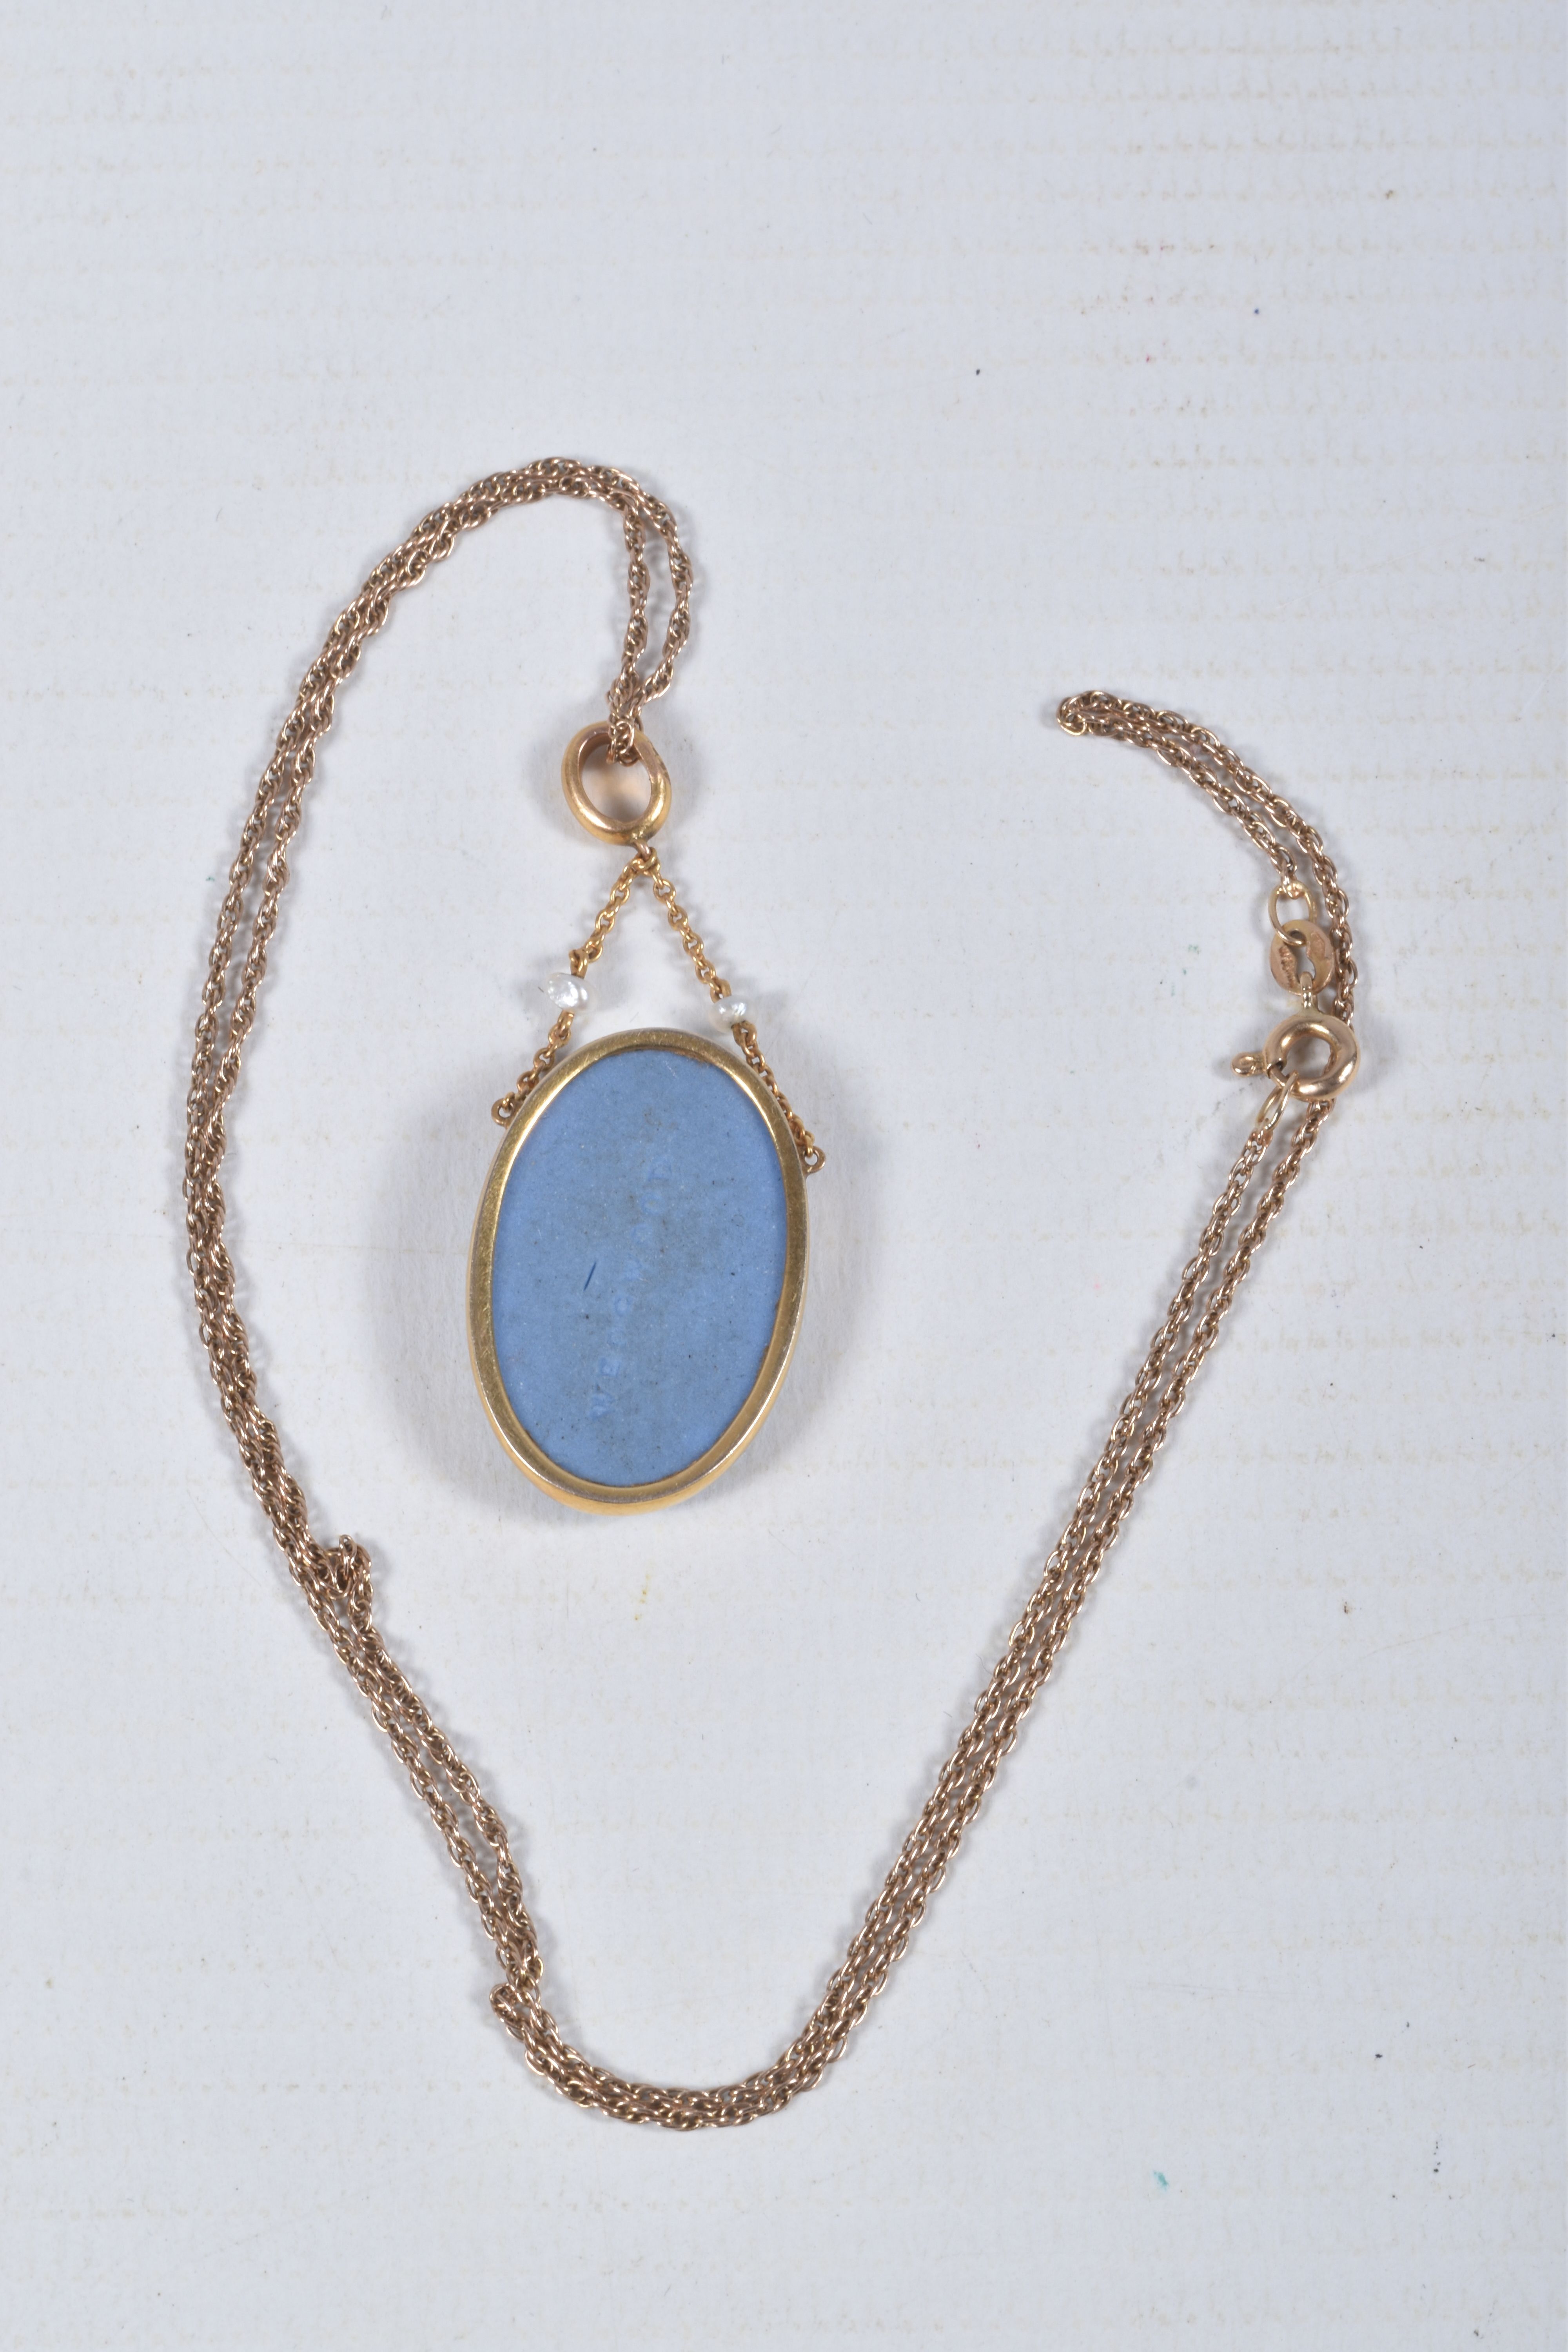 A 9CT GOLD WEDGWOOD PENDANT NECKLACE, the oval Wedgwood pendant depicting a female figure, suspended - Image 5 of 5